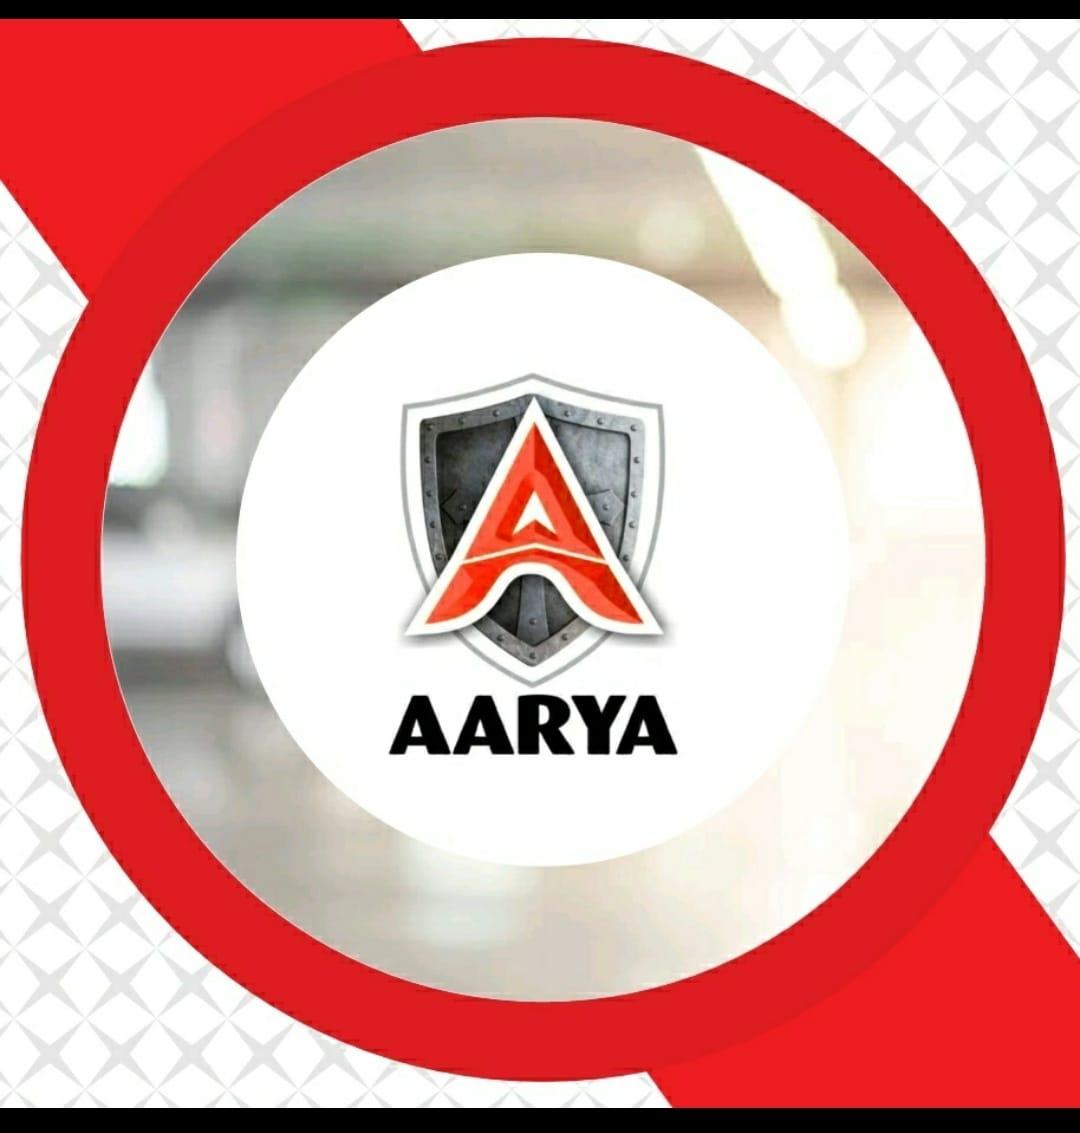 Aarya Automative Solutions